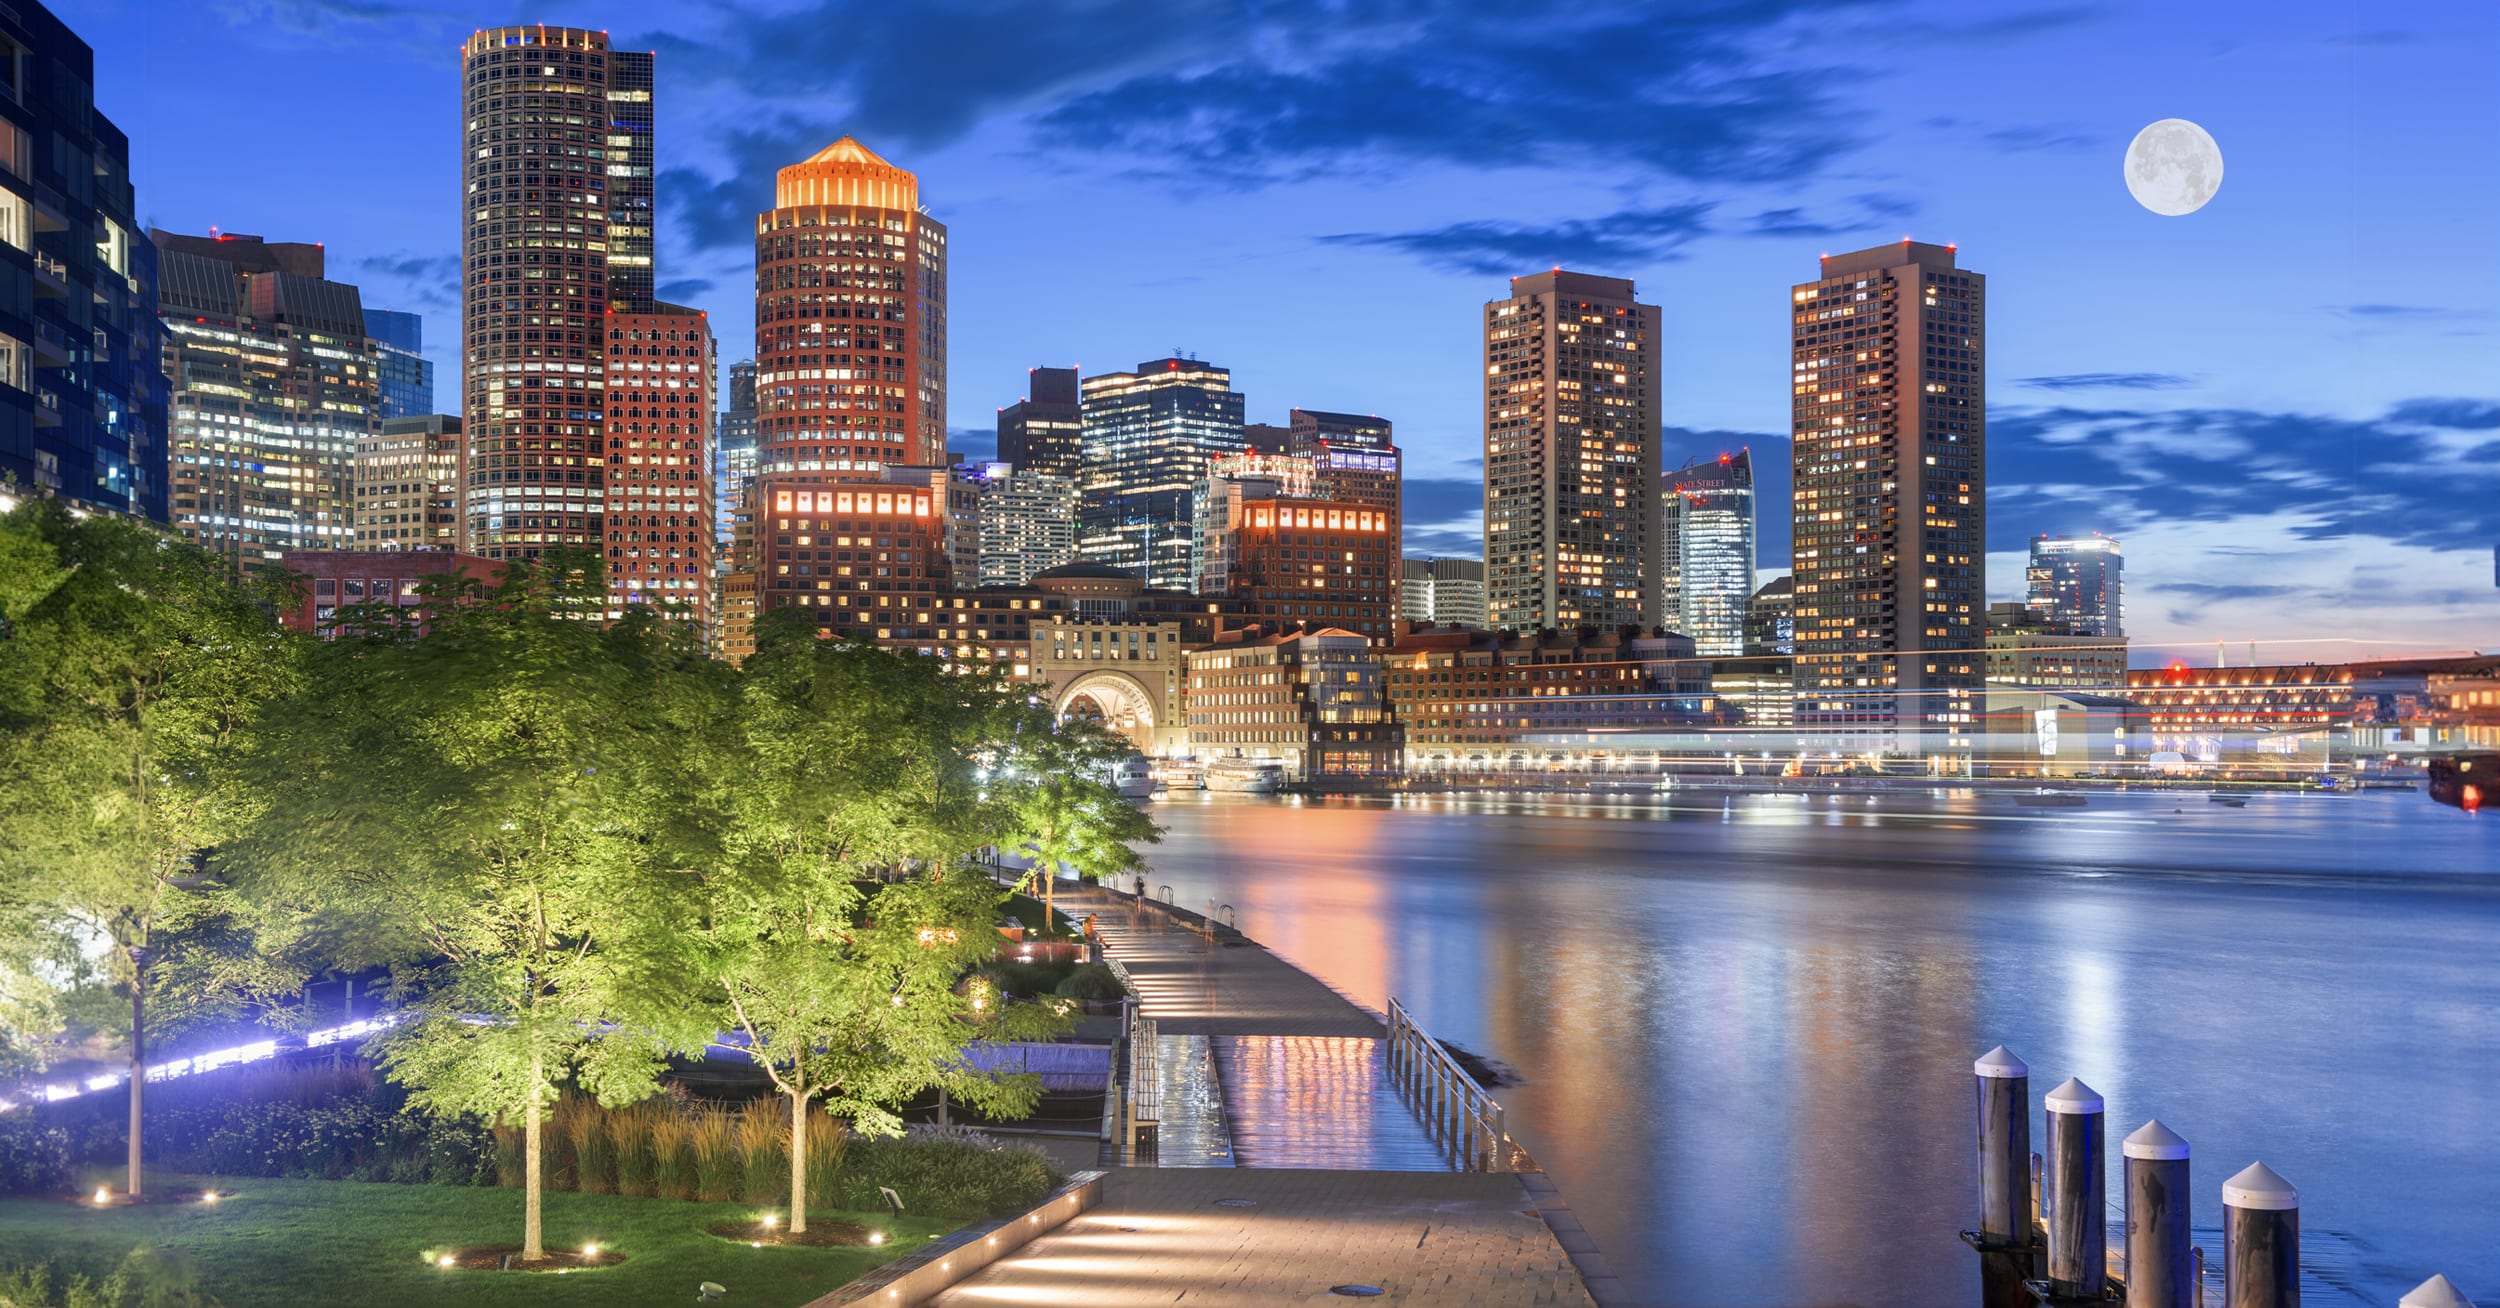 18 Amazing Events Coming to Boston in July 2023 06/29/23